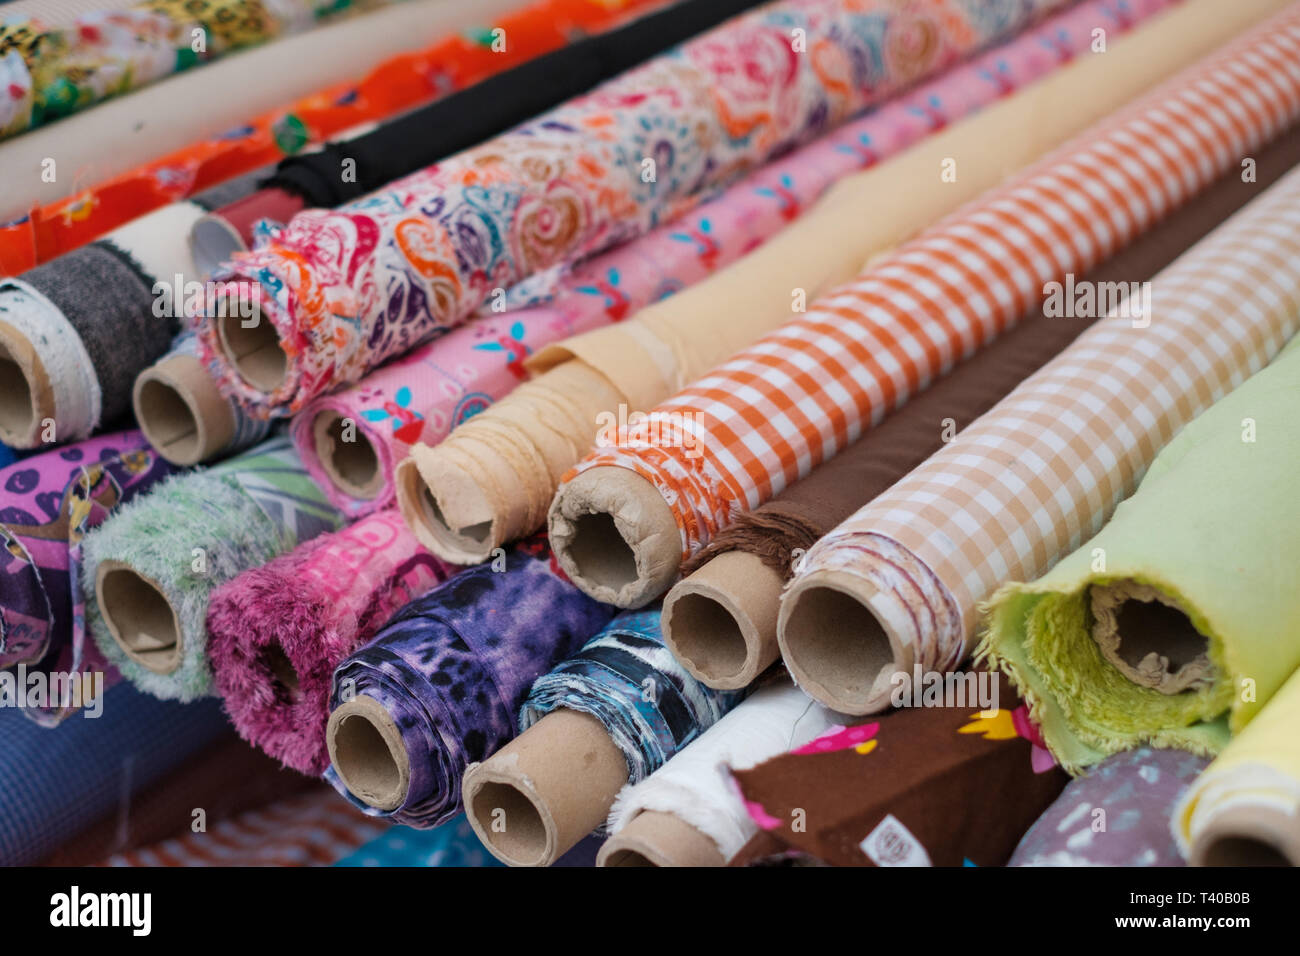 many fabric rolls and colorful textiles at market - Stock Photo